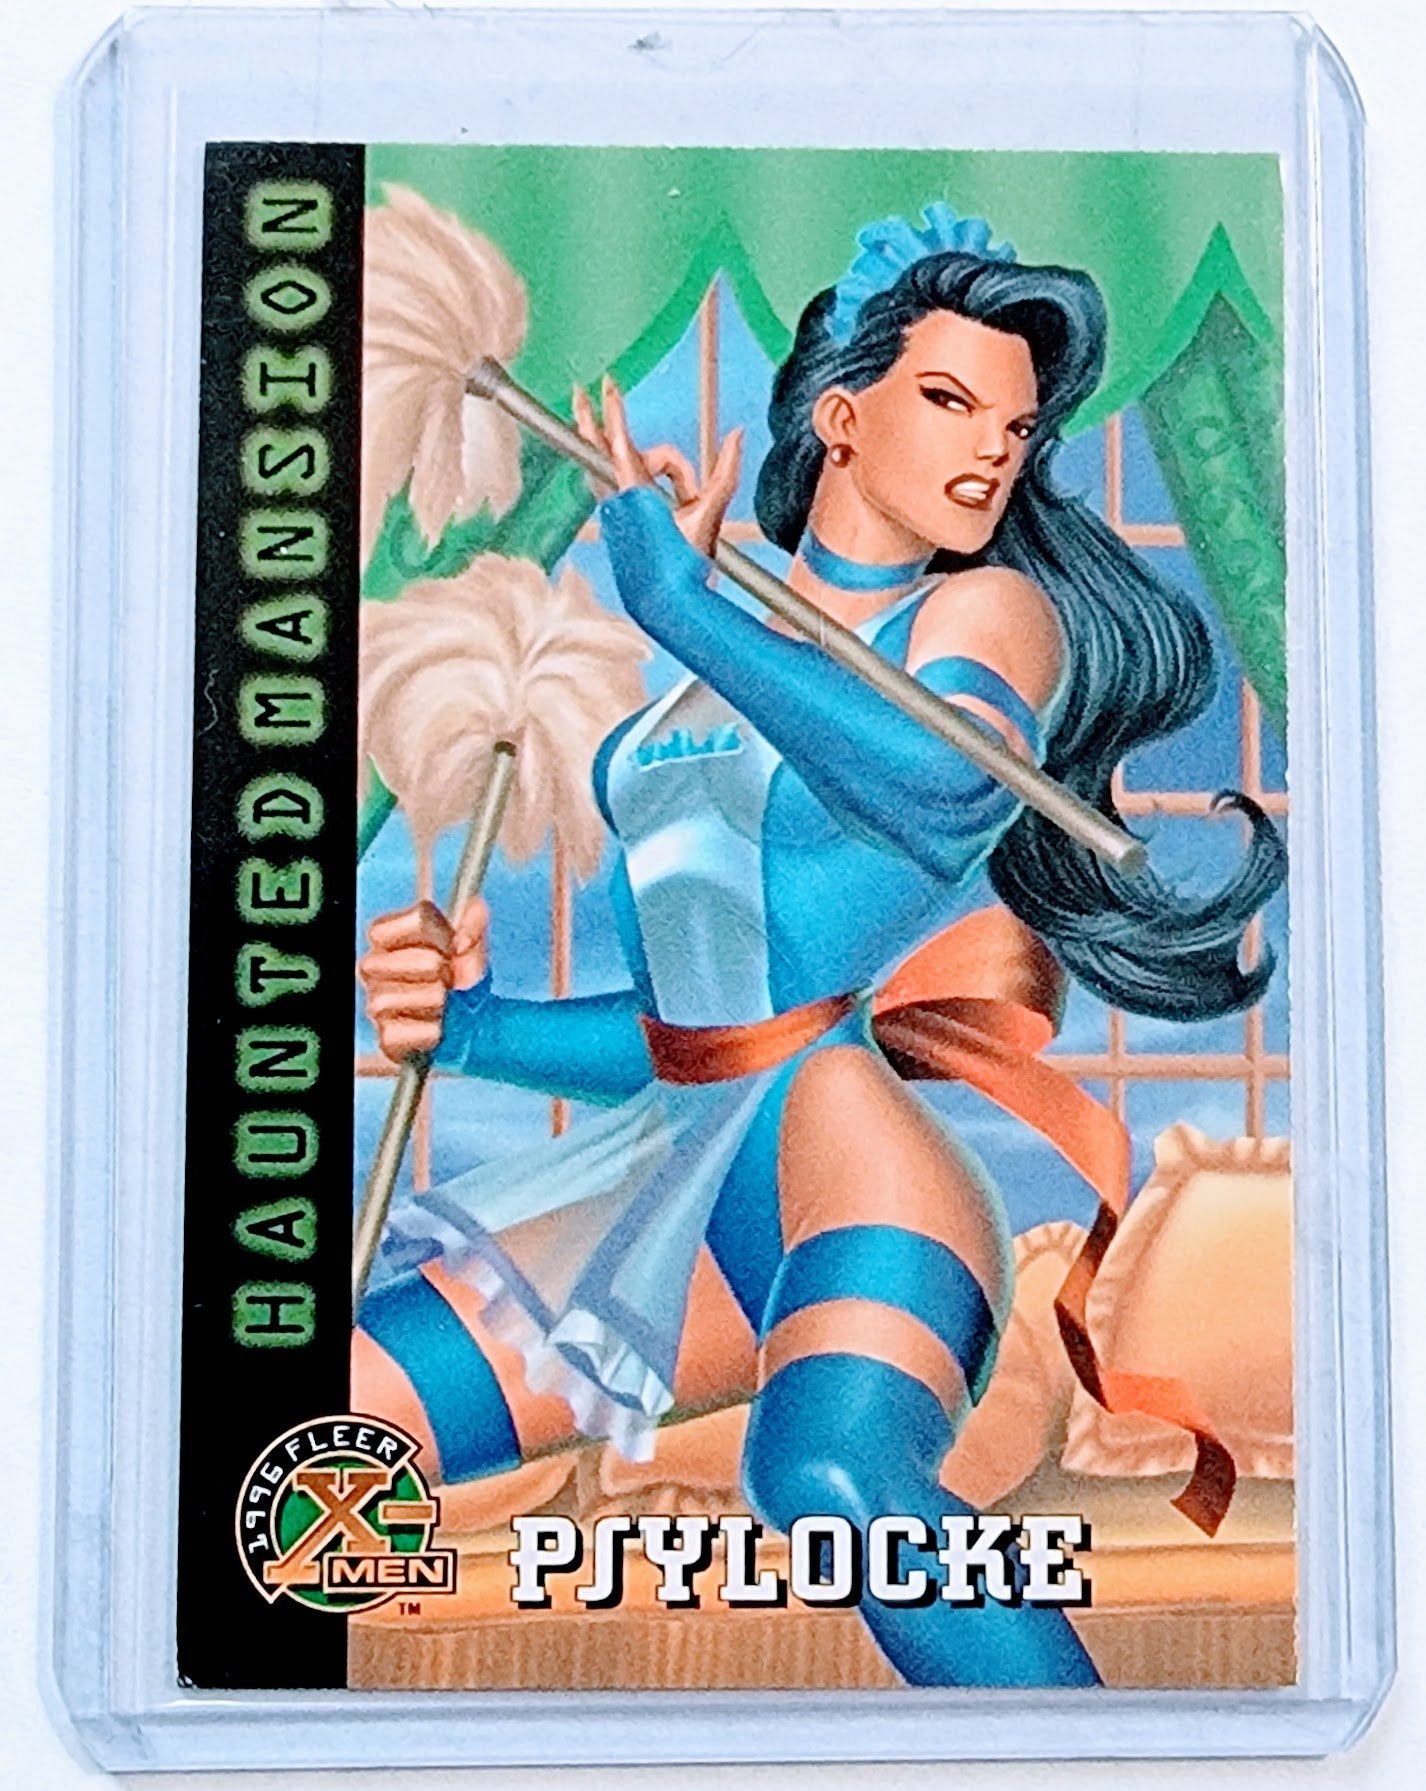 1996 Fleer X-Men Psylocke Haunted Mansion Marvel Trading Card VG AVM1 simple Xclusive Collectibles   